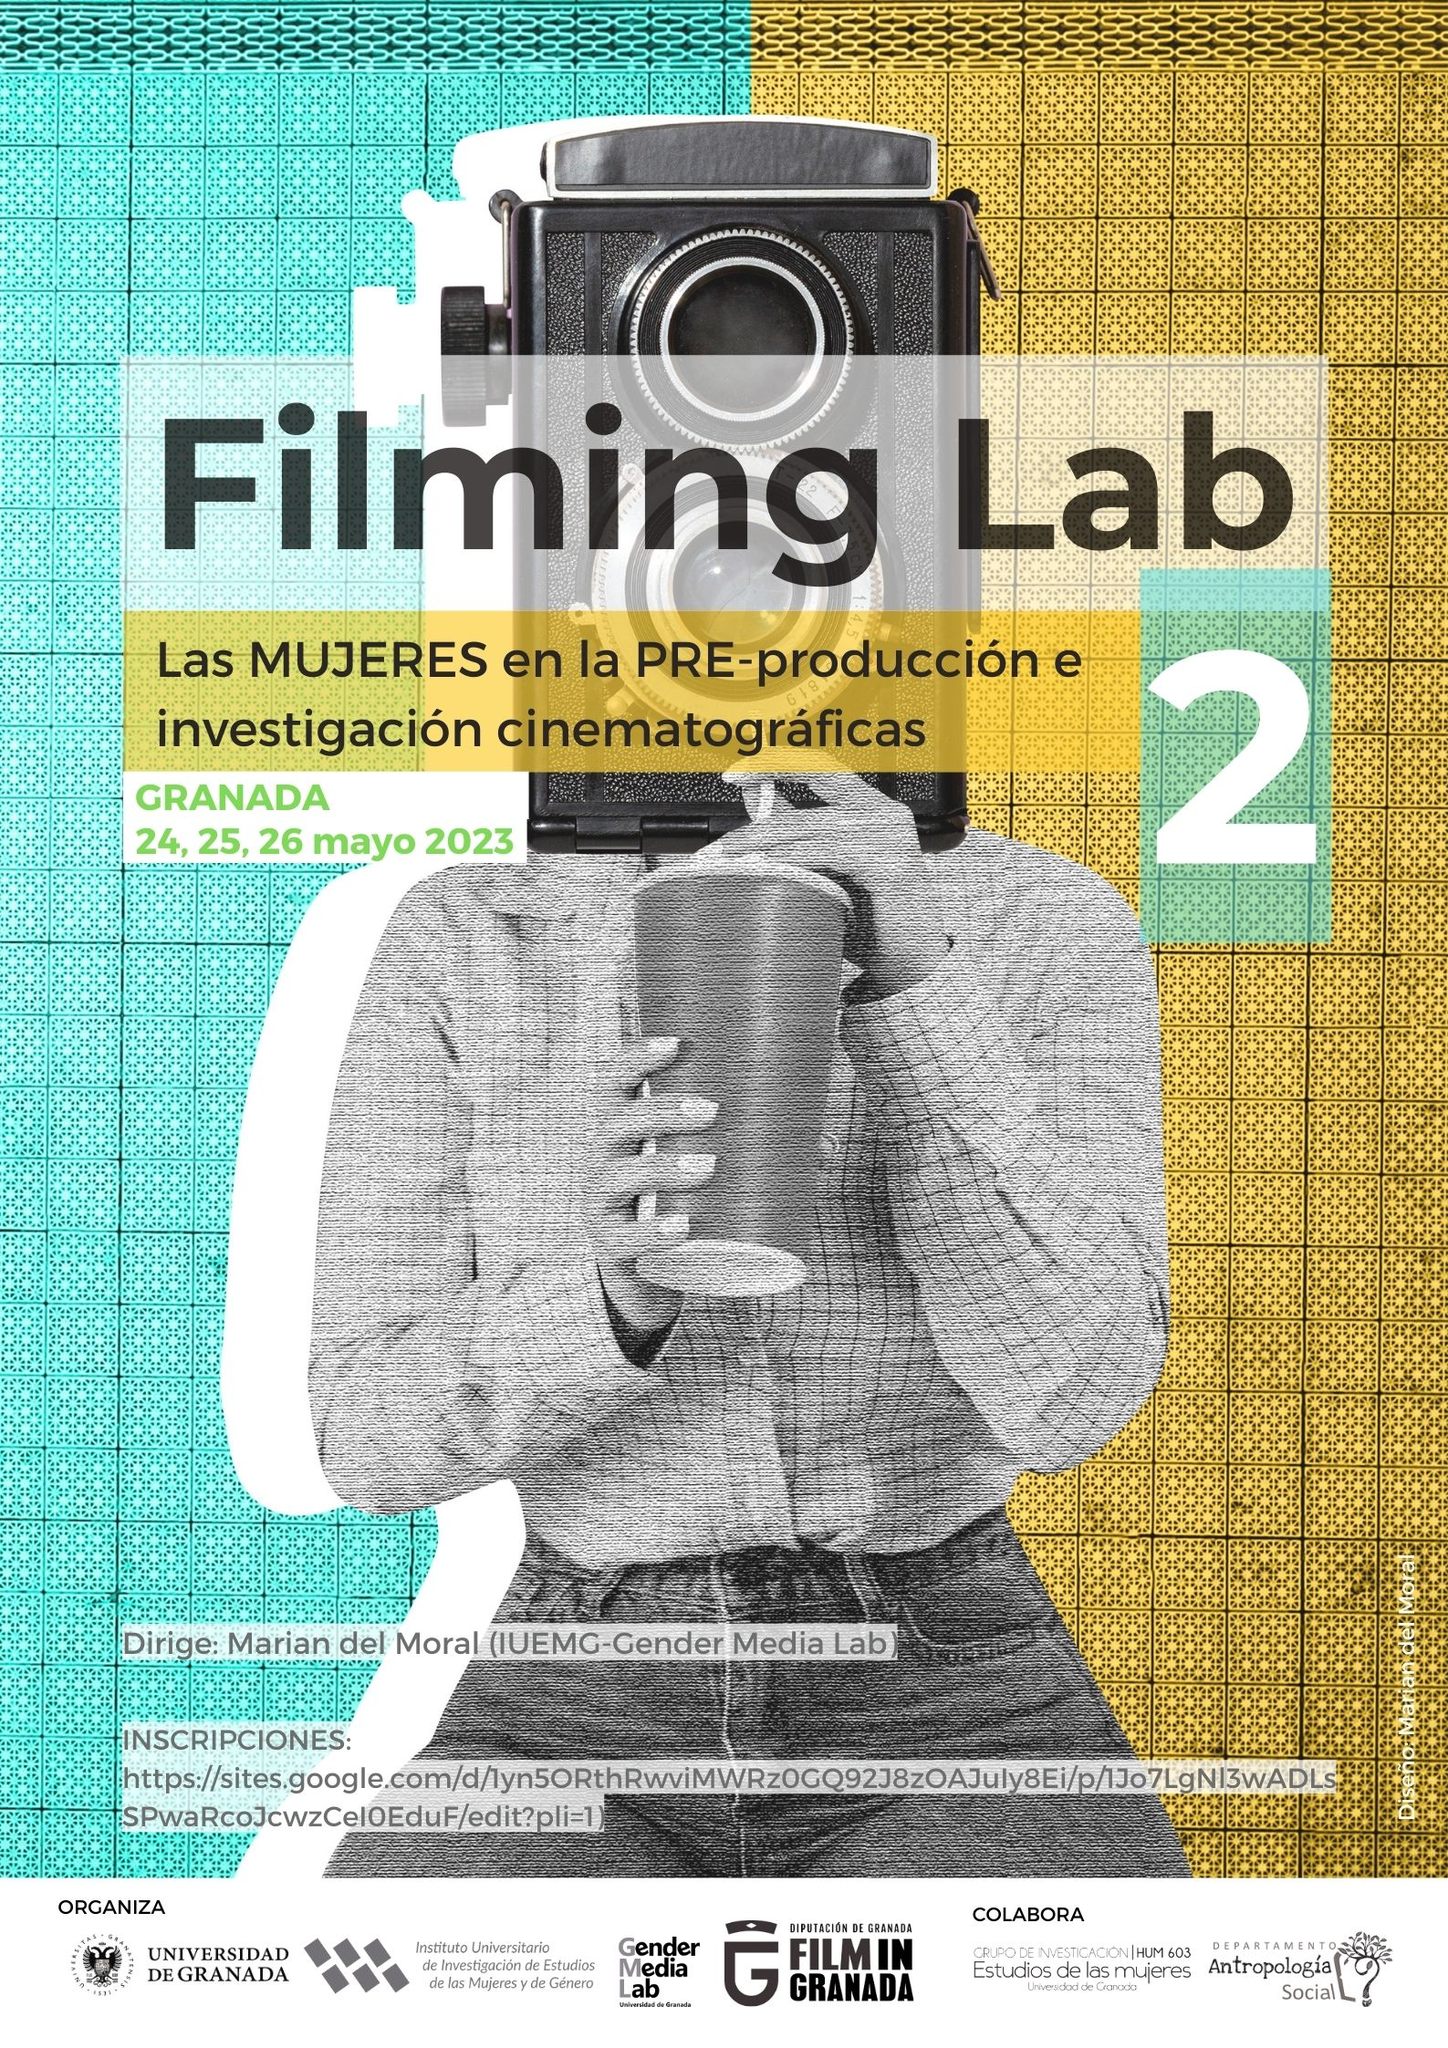 “Filming Lab 2” will bring together filmakers and researchers around pre-production